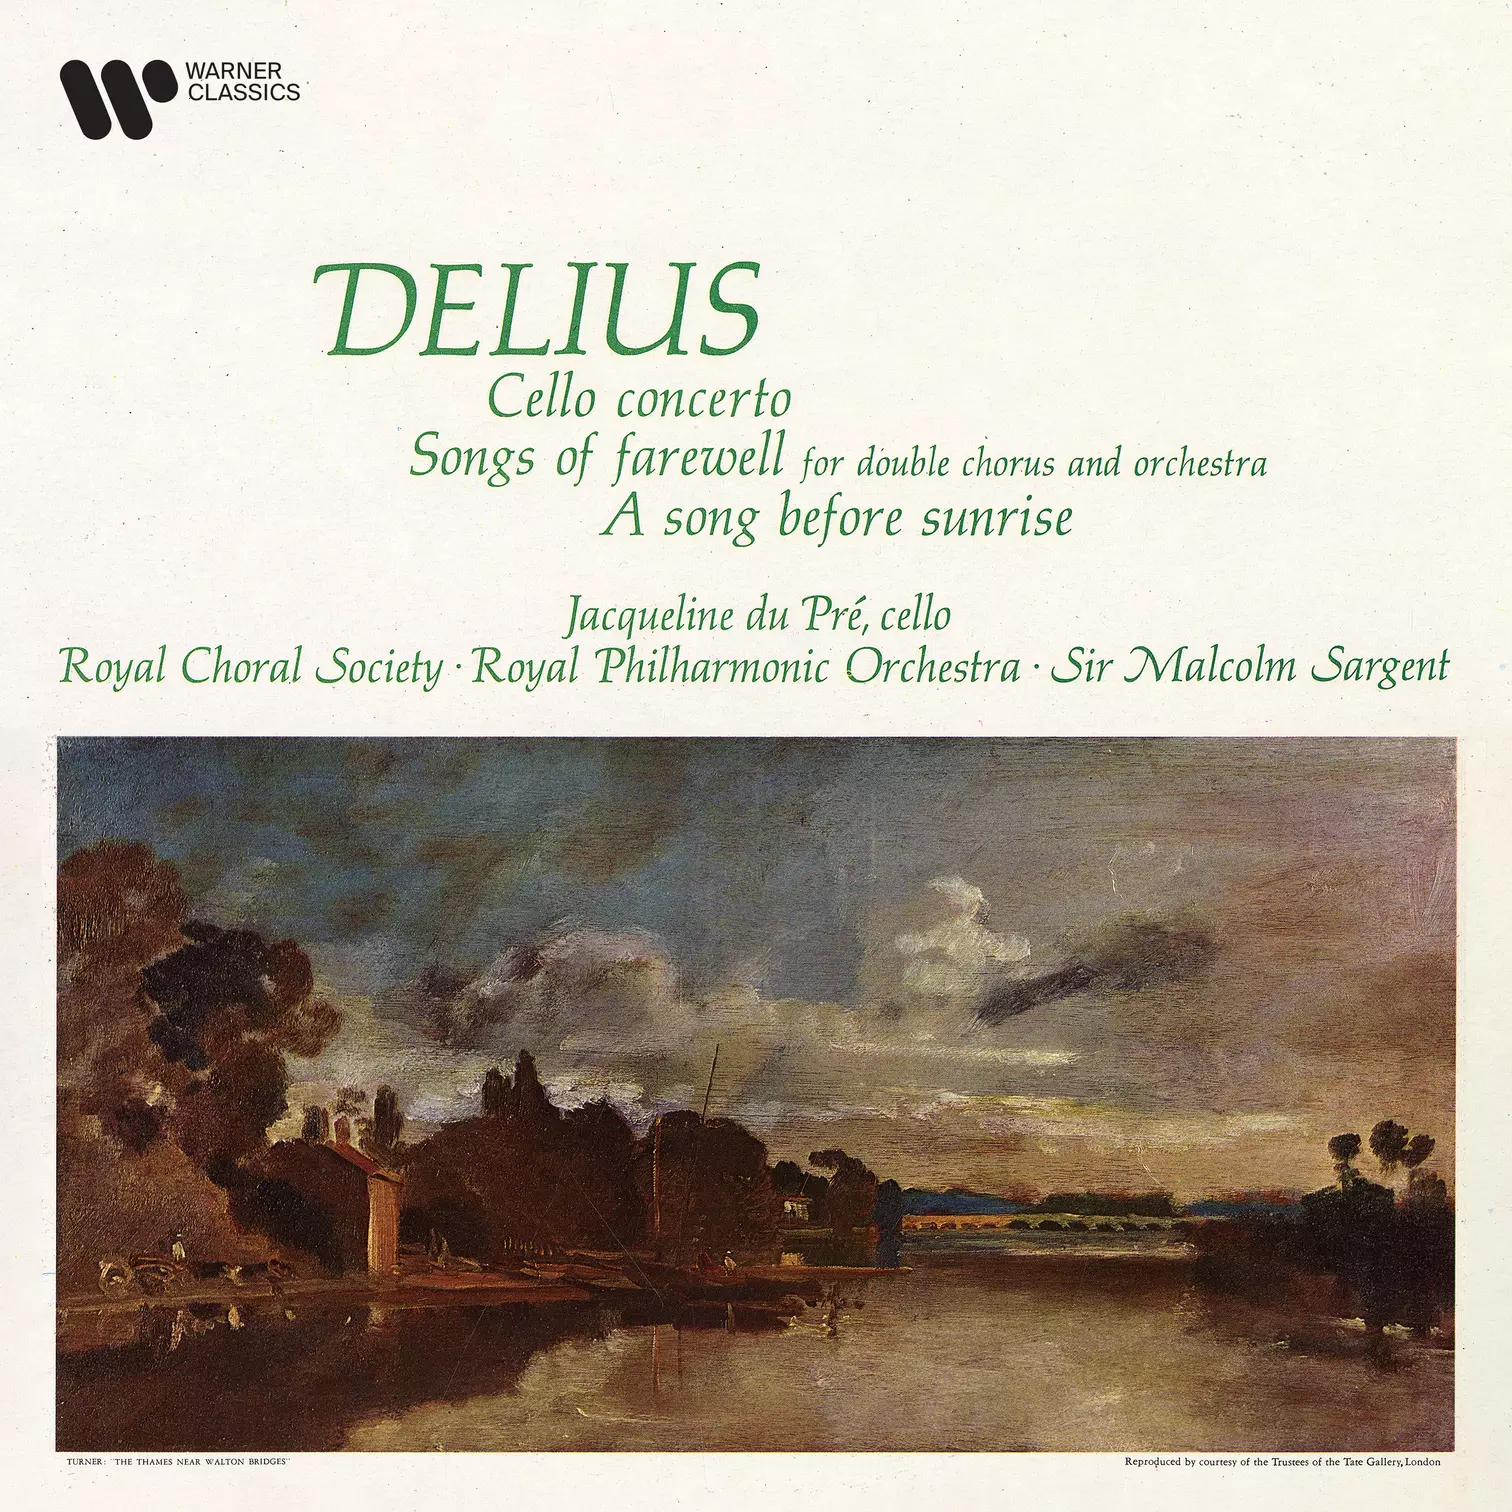 Delius: Cello Concerto, Songs of Farewell & A Song Before Sunrise